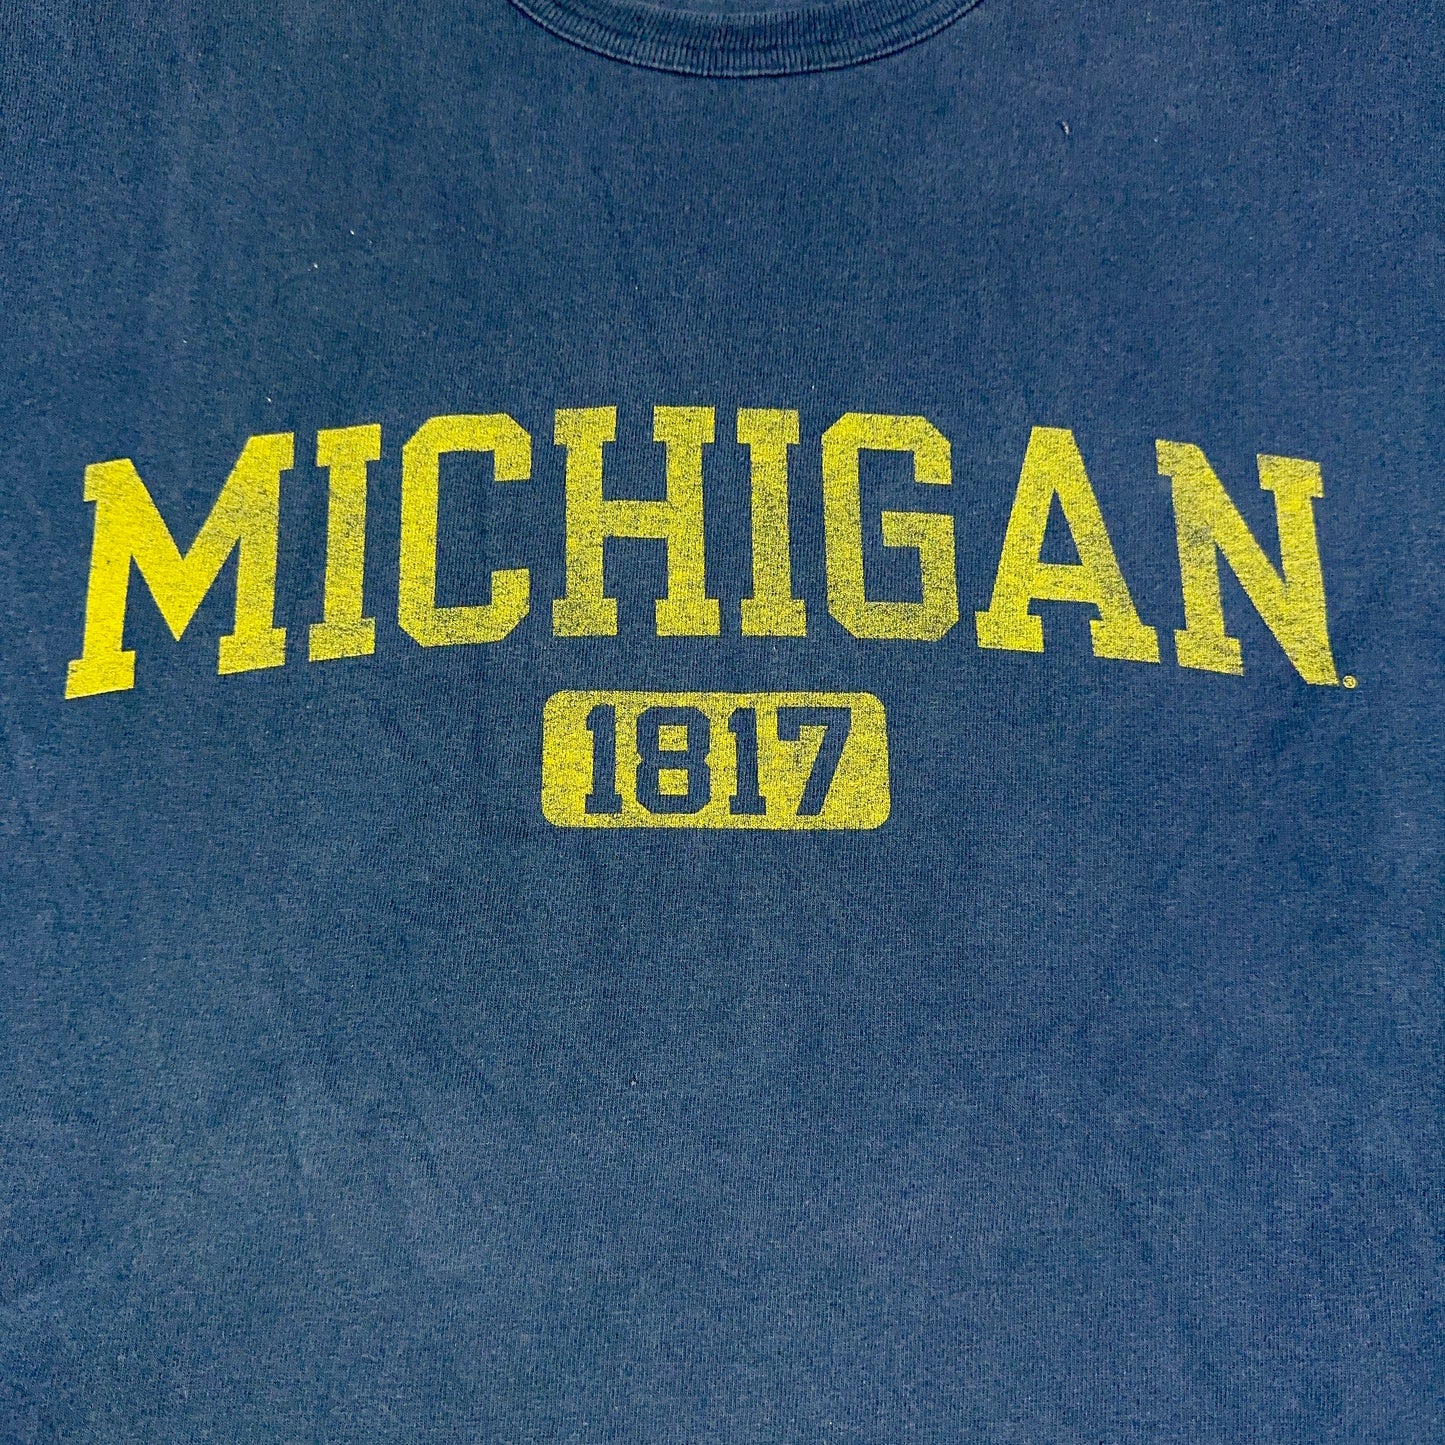 University of Michigan Navy Blue Chmpion Lone. Seeve Tee